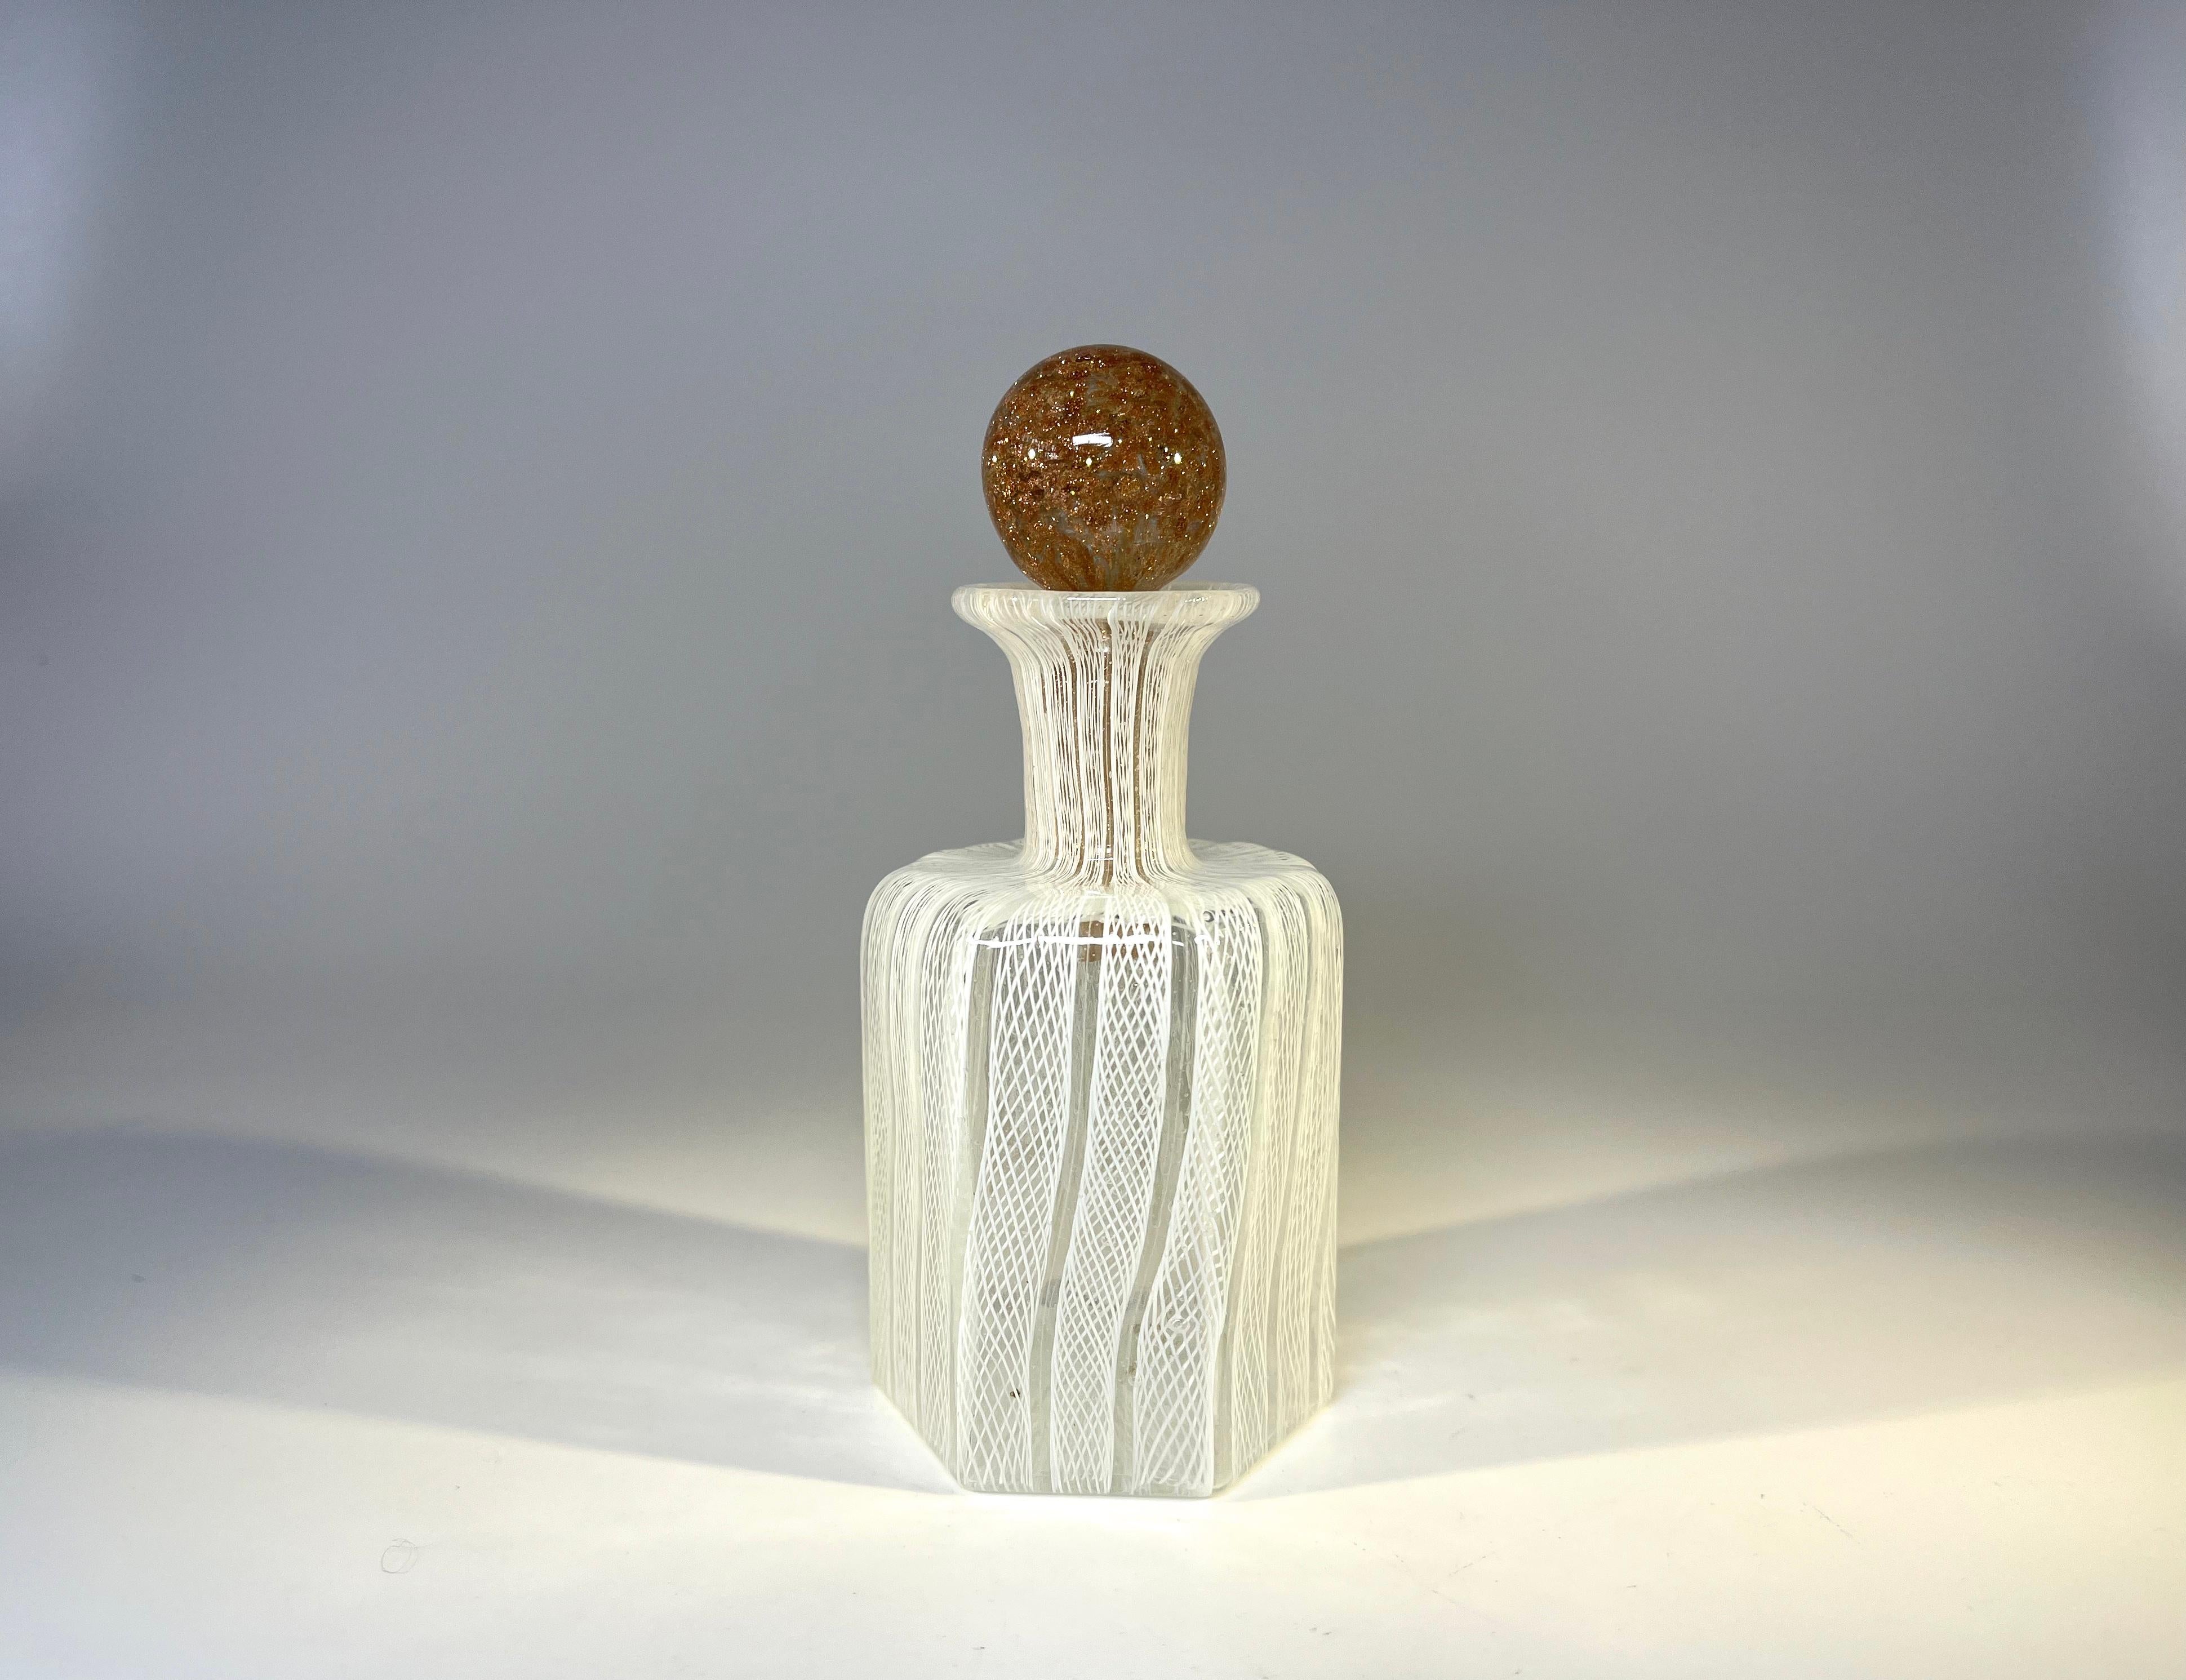 Pure white Venetian ribbons adorn this latticino Murano glass perfume bottle.
An unusual shaped bottle with an unexpected aventurine stopper.
Certainly a desirable piece of Venetian glass work.
Circa mid-century.
Measures: height 4.75 inch,